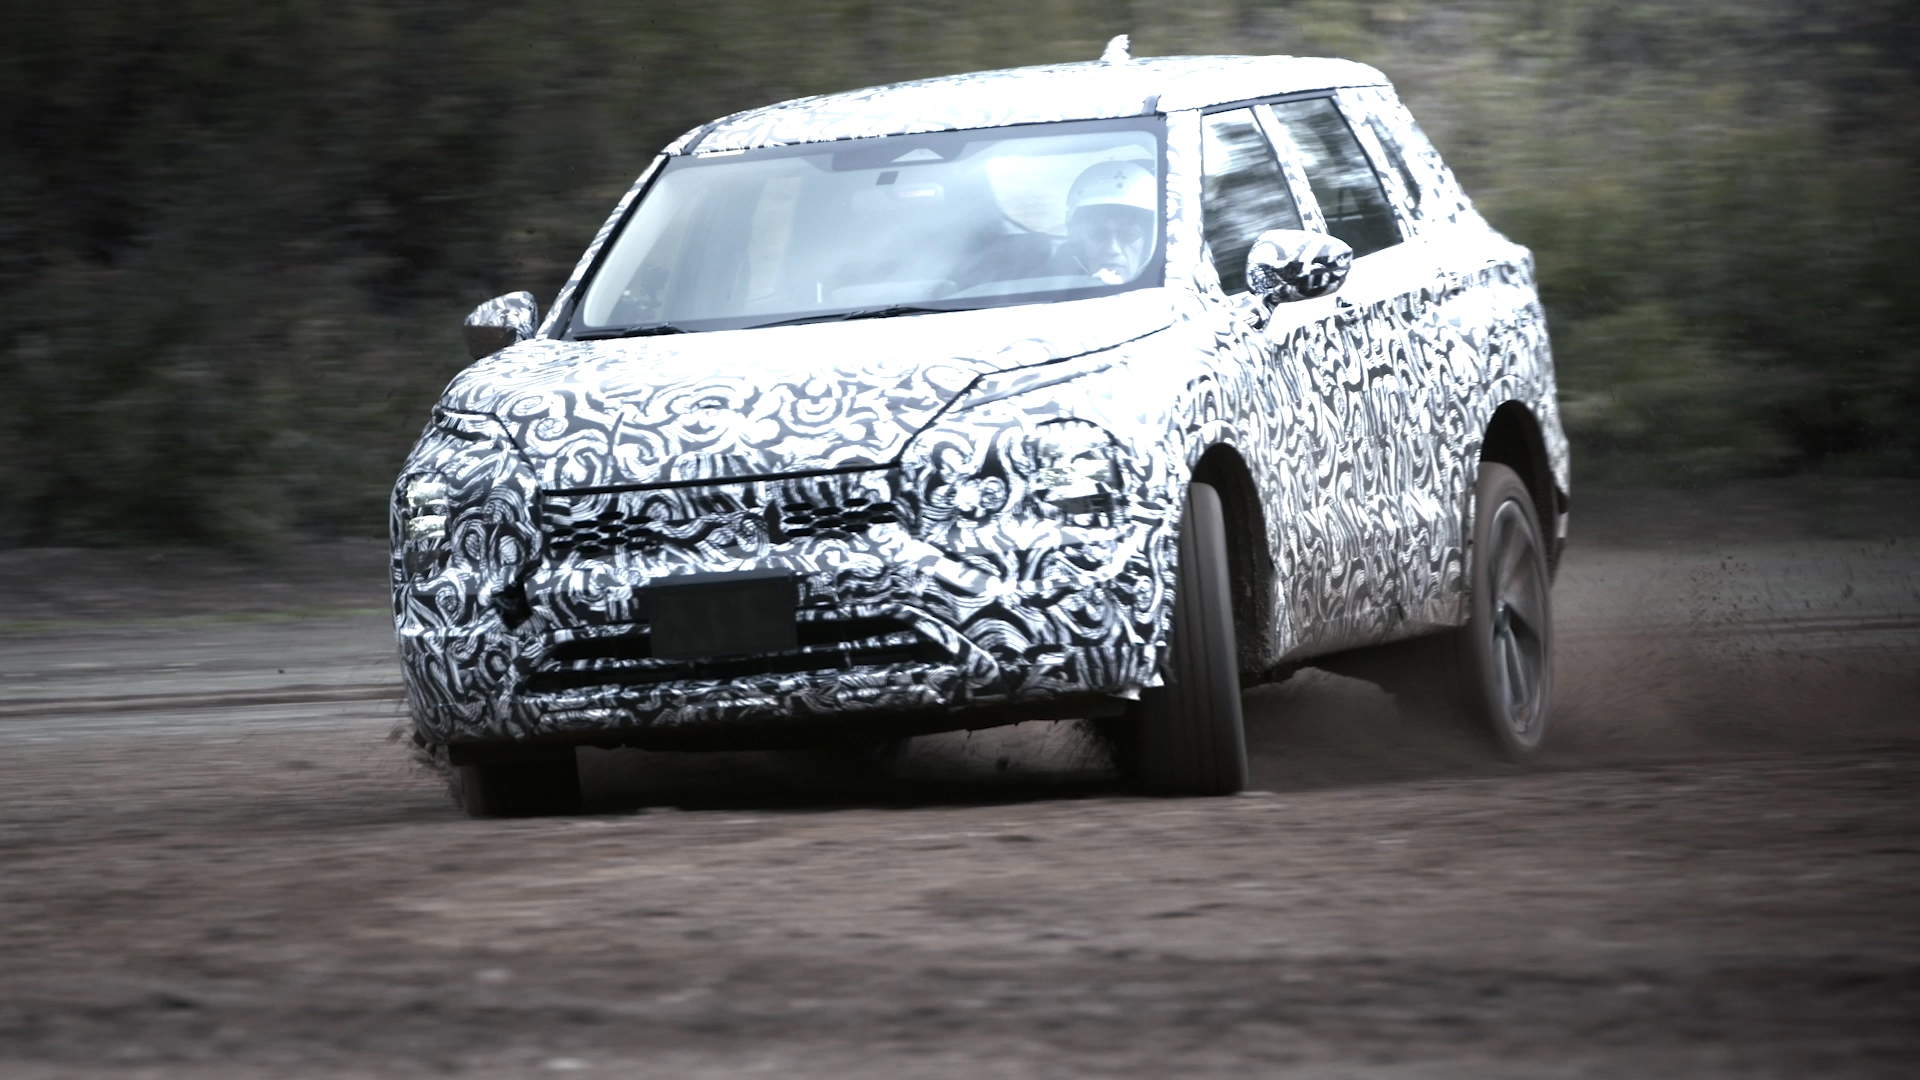 Mitsubishi Shows New Outlander Undergoing Final Dynamic Testing Ahead of February 16 Reveal